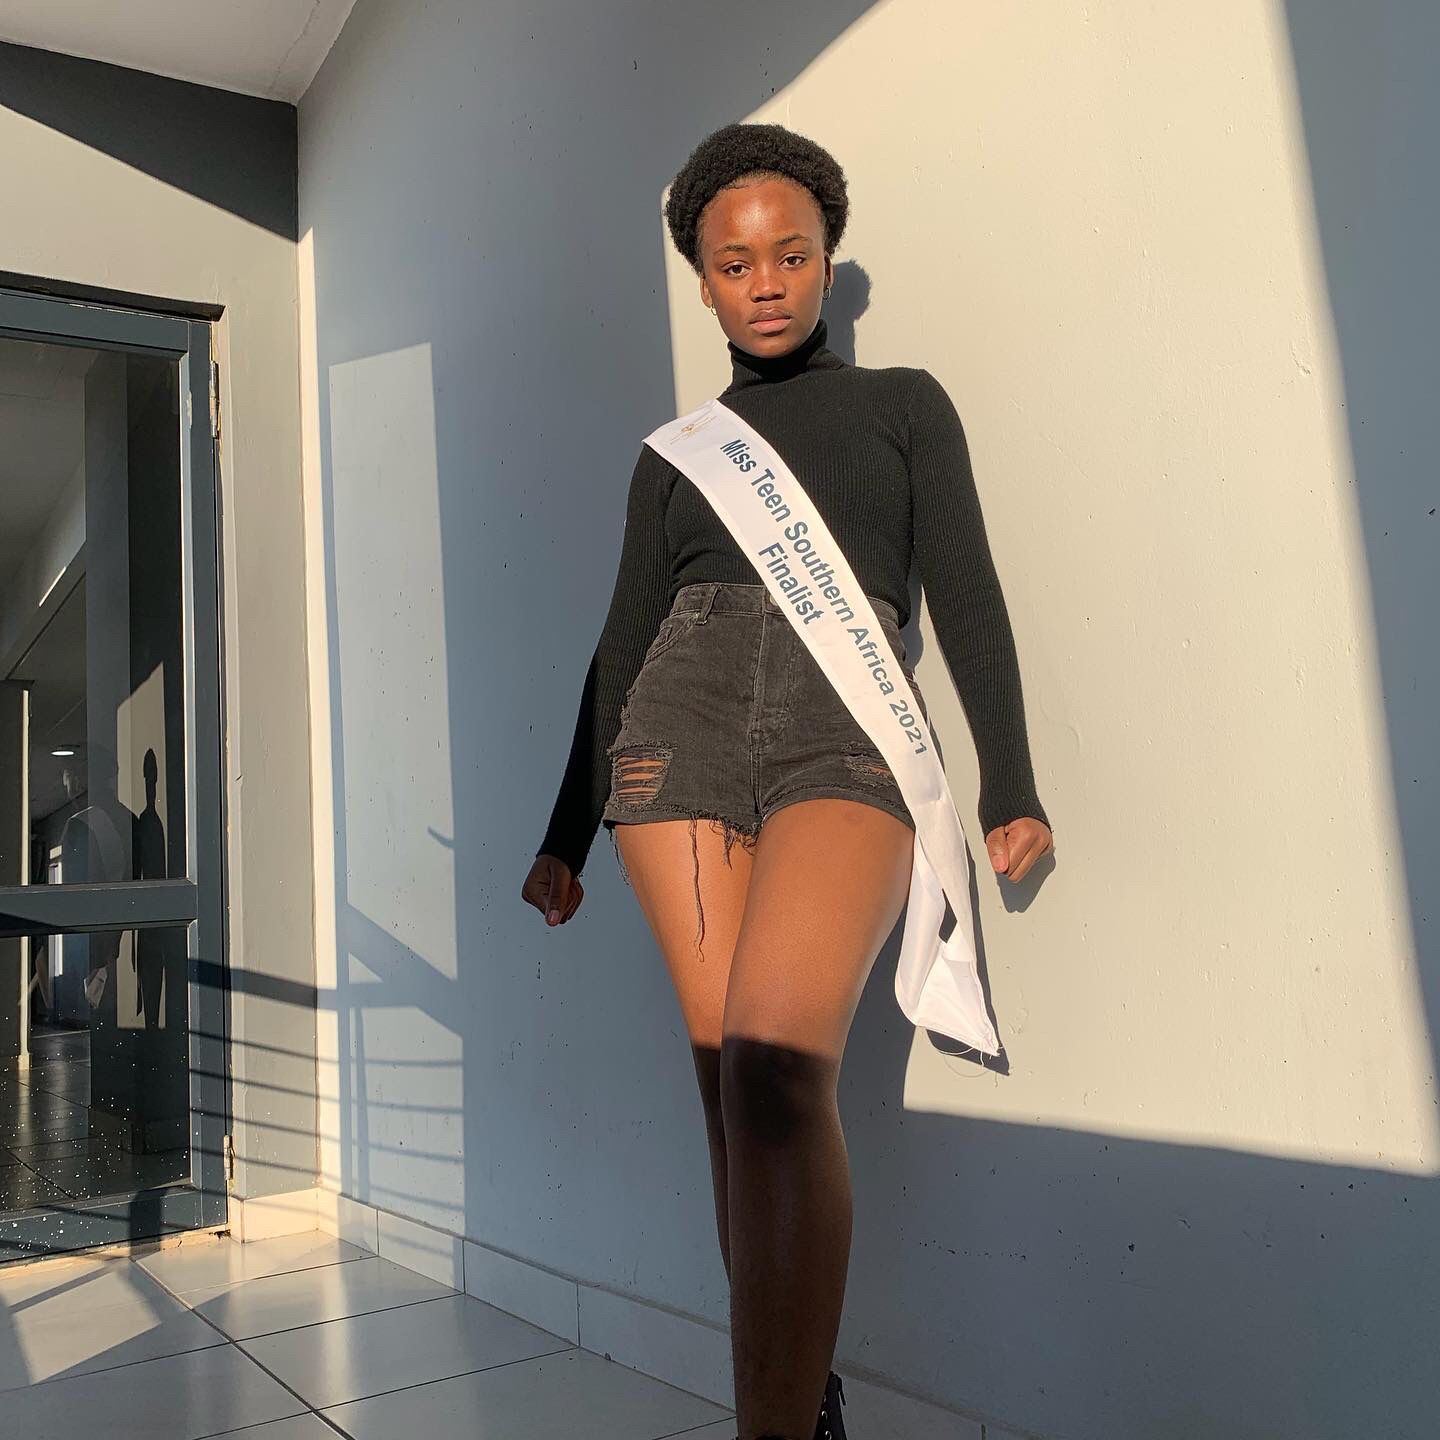 Miss Teen Southern Africa Finalist is not only hot, but has  great mind